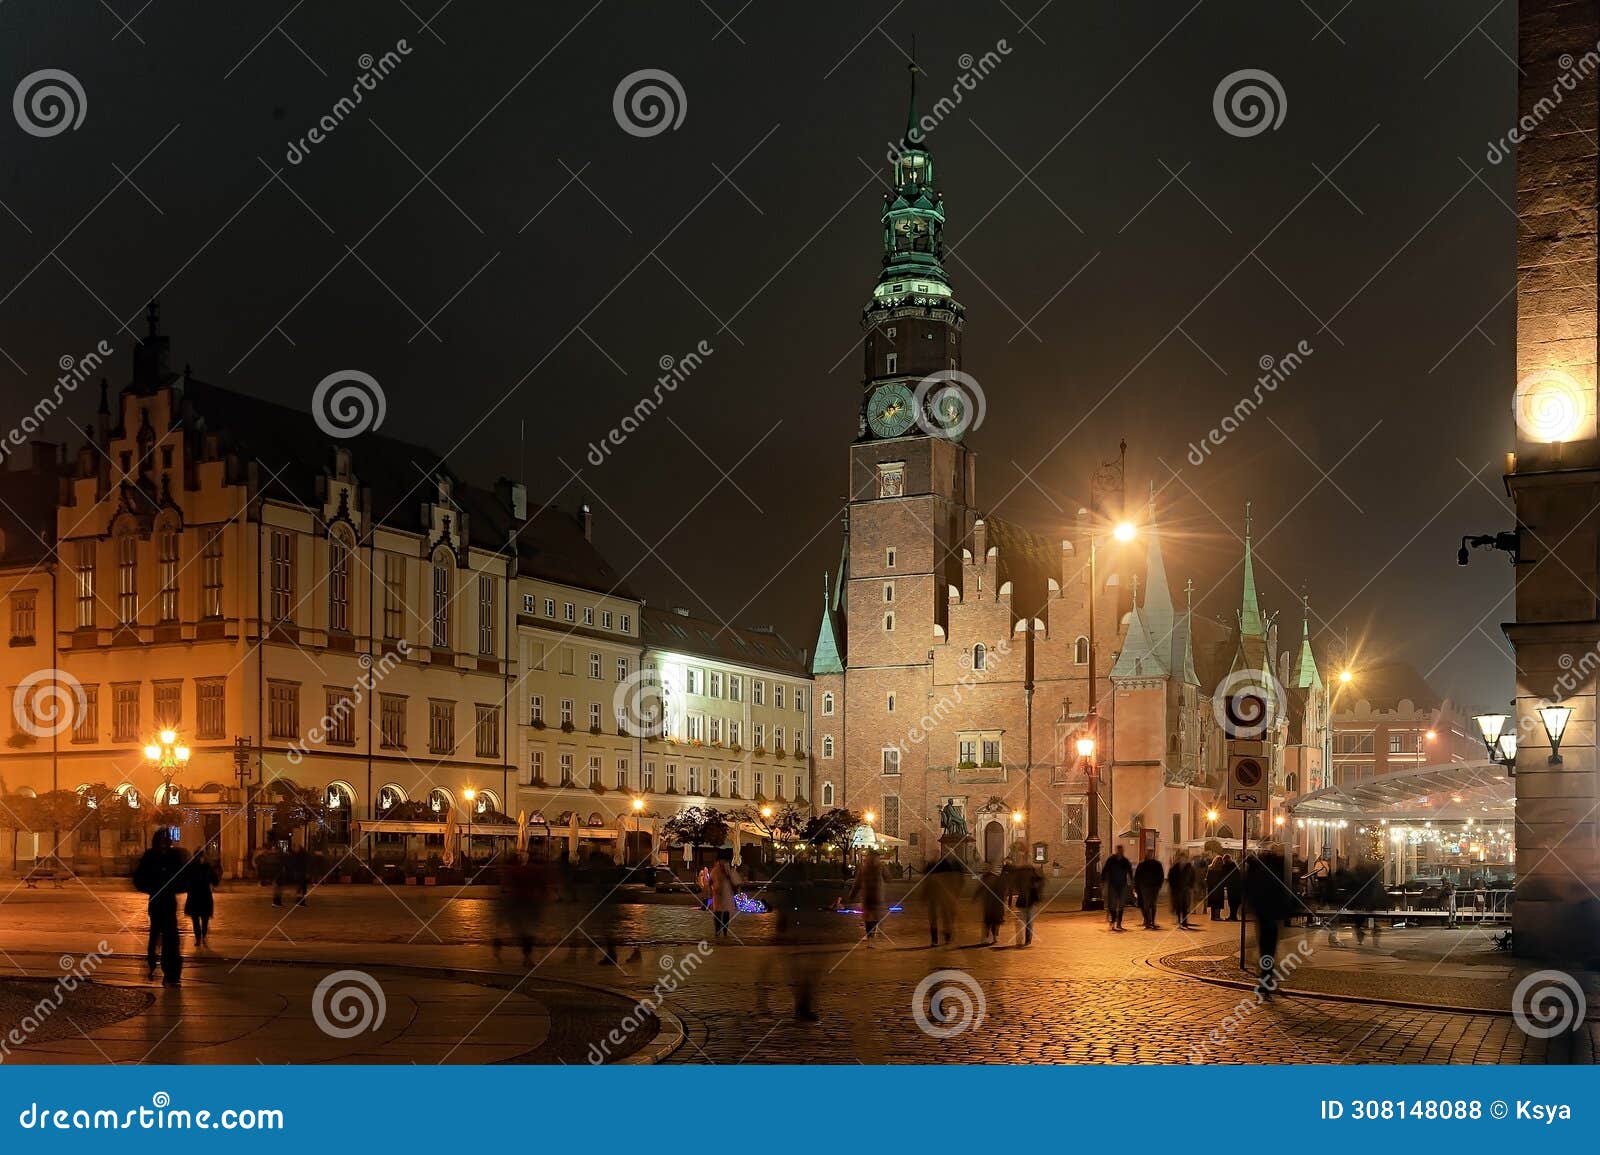 wroclaw market square with town hall in wroclaw poland